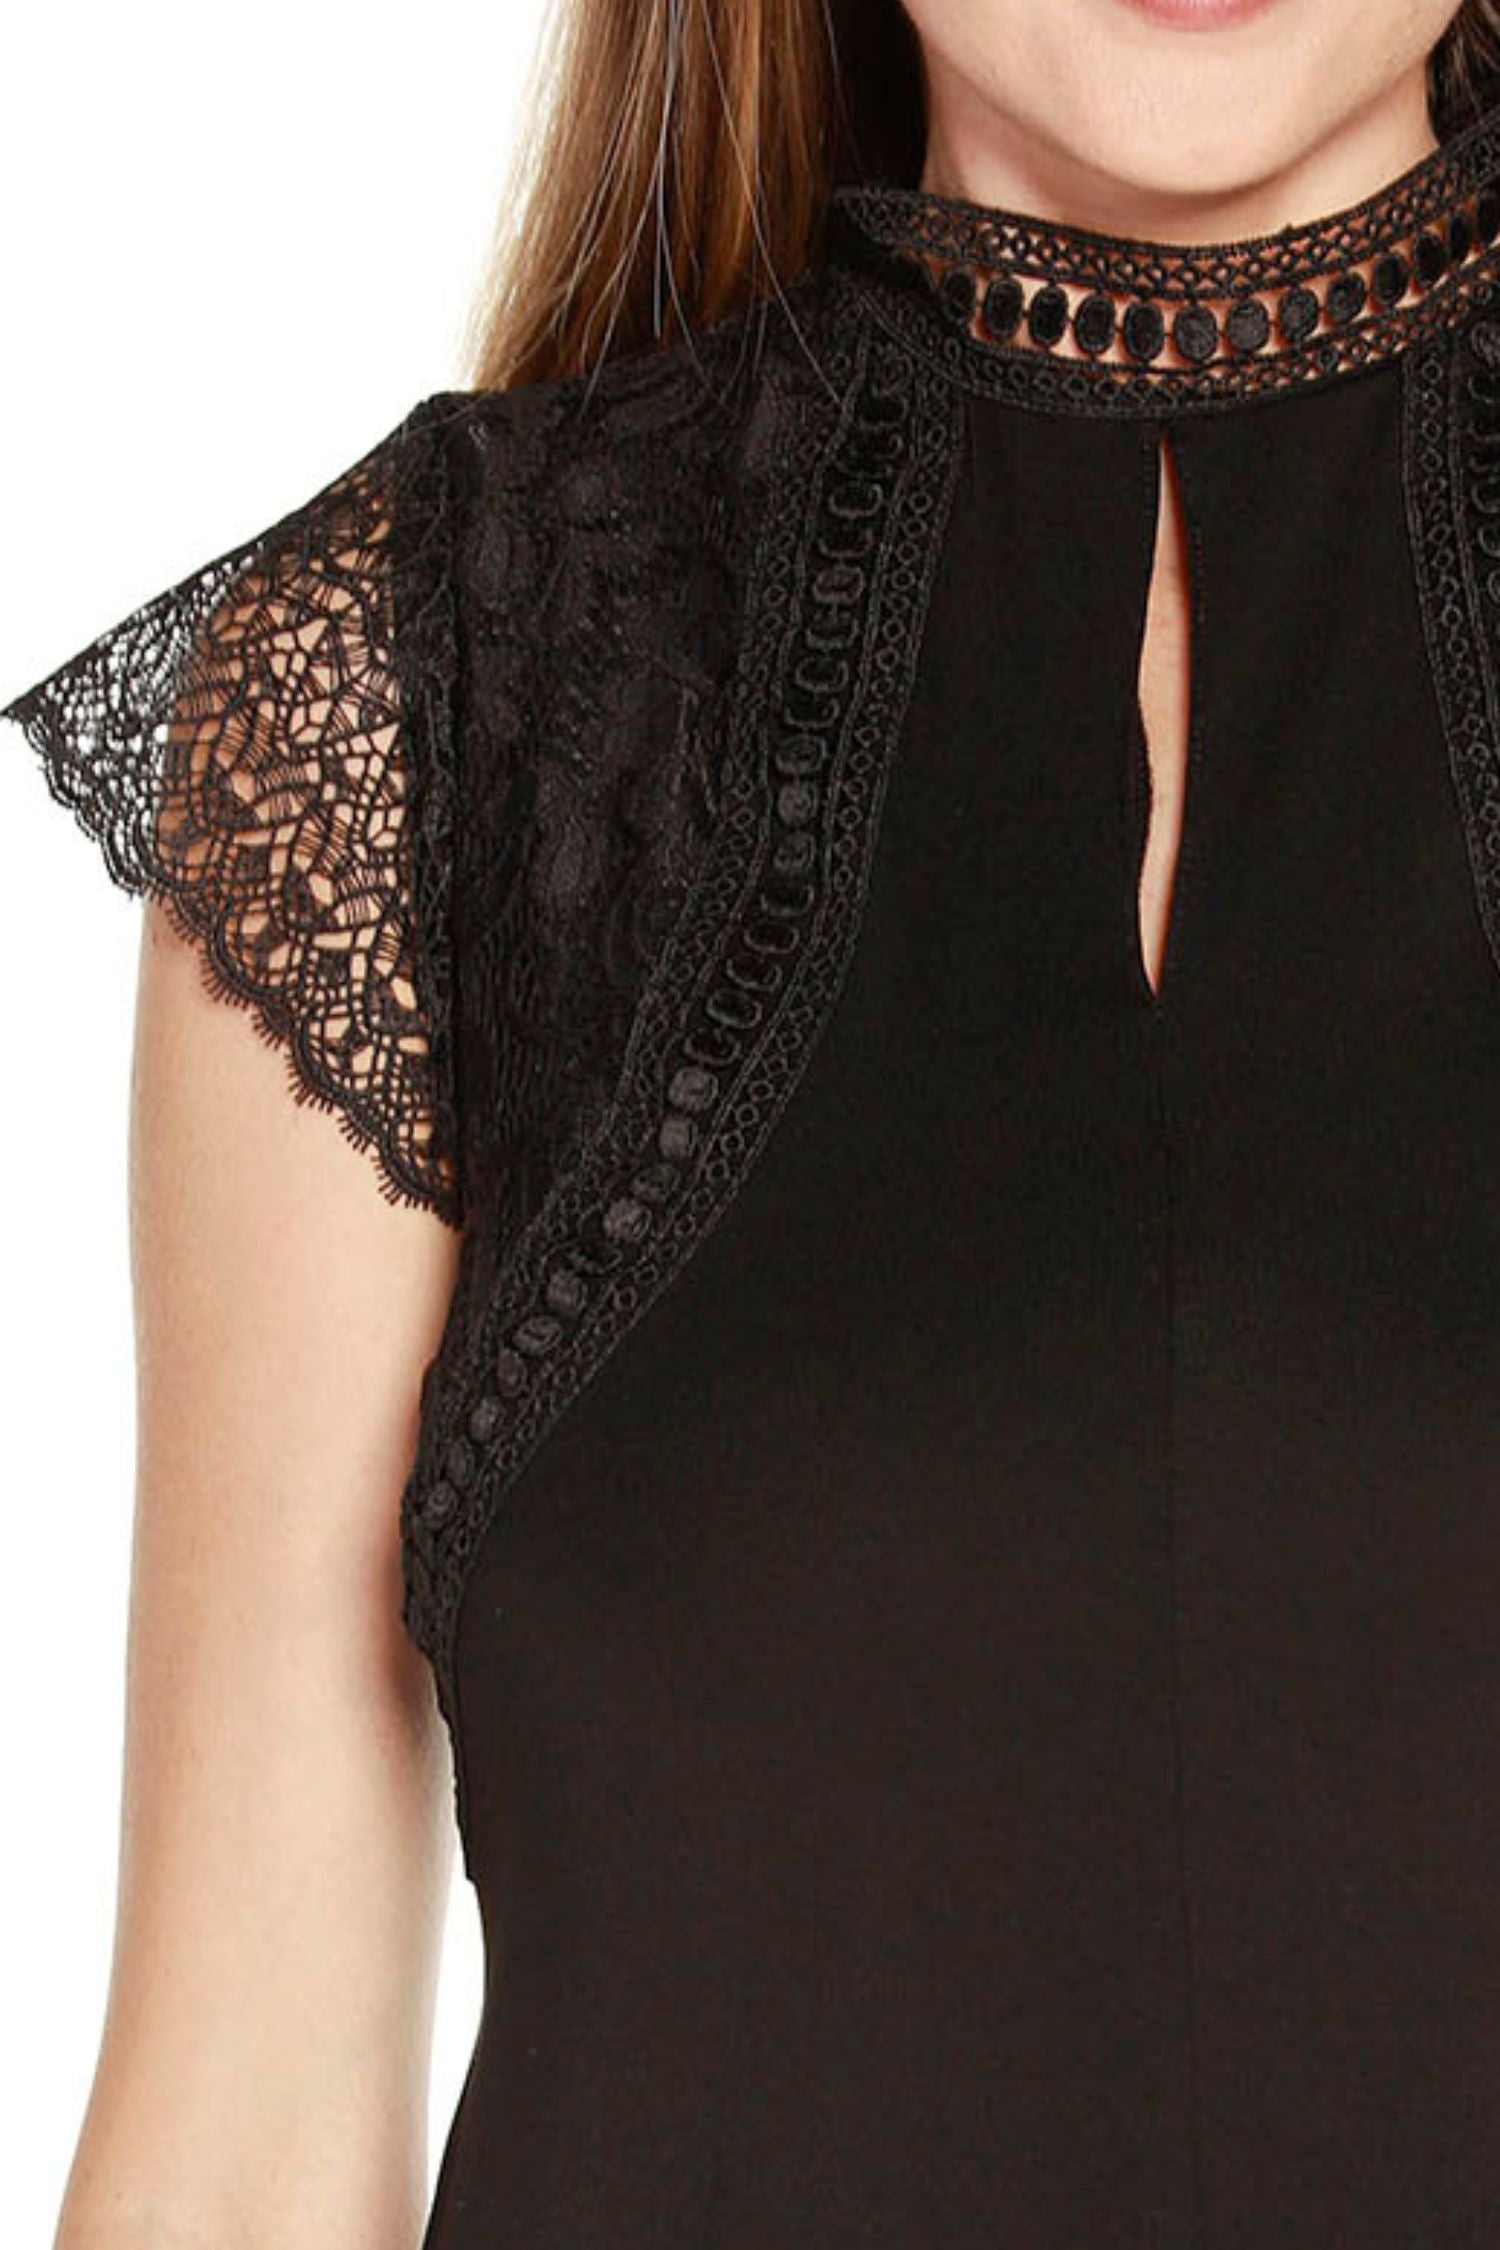 Women's Cap Sleeve Top with Lace Detailing in a Soft Knit Jersey